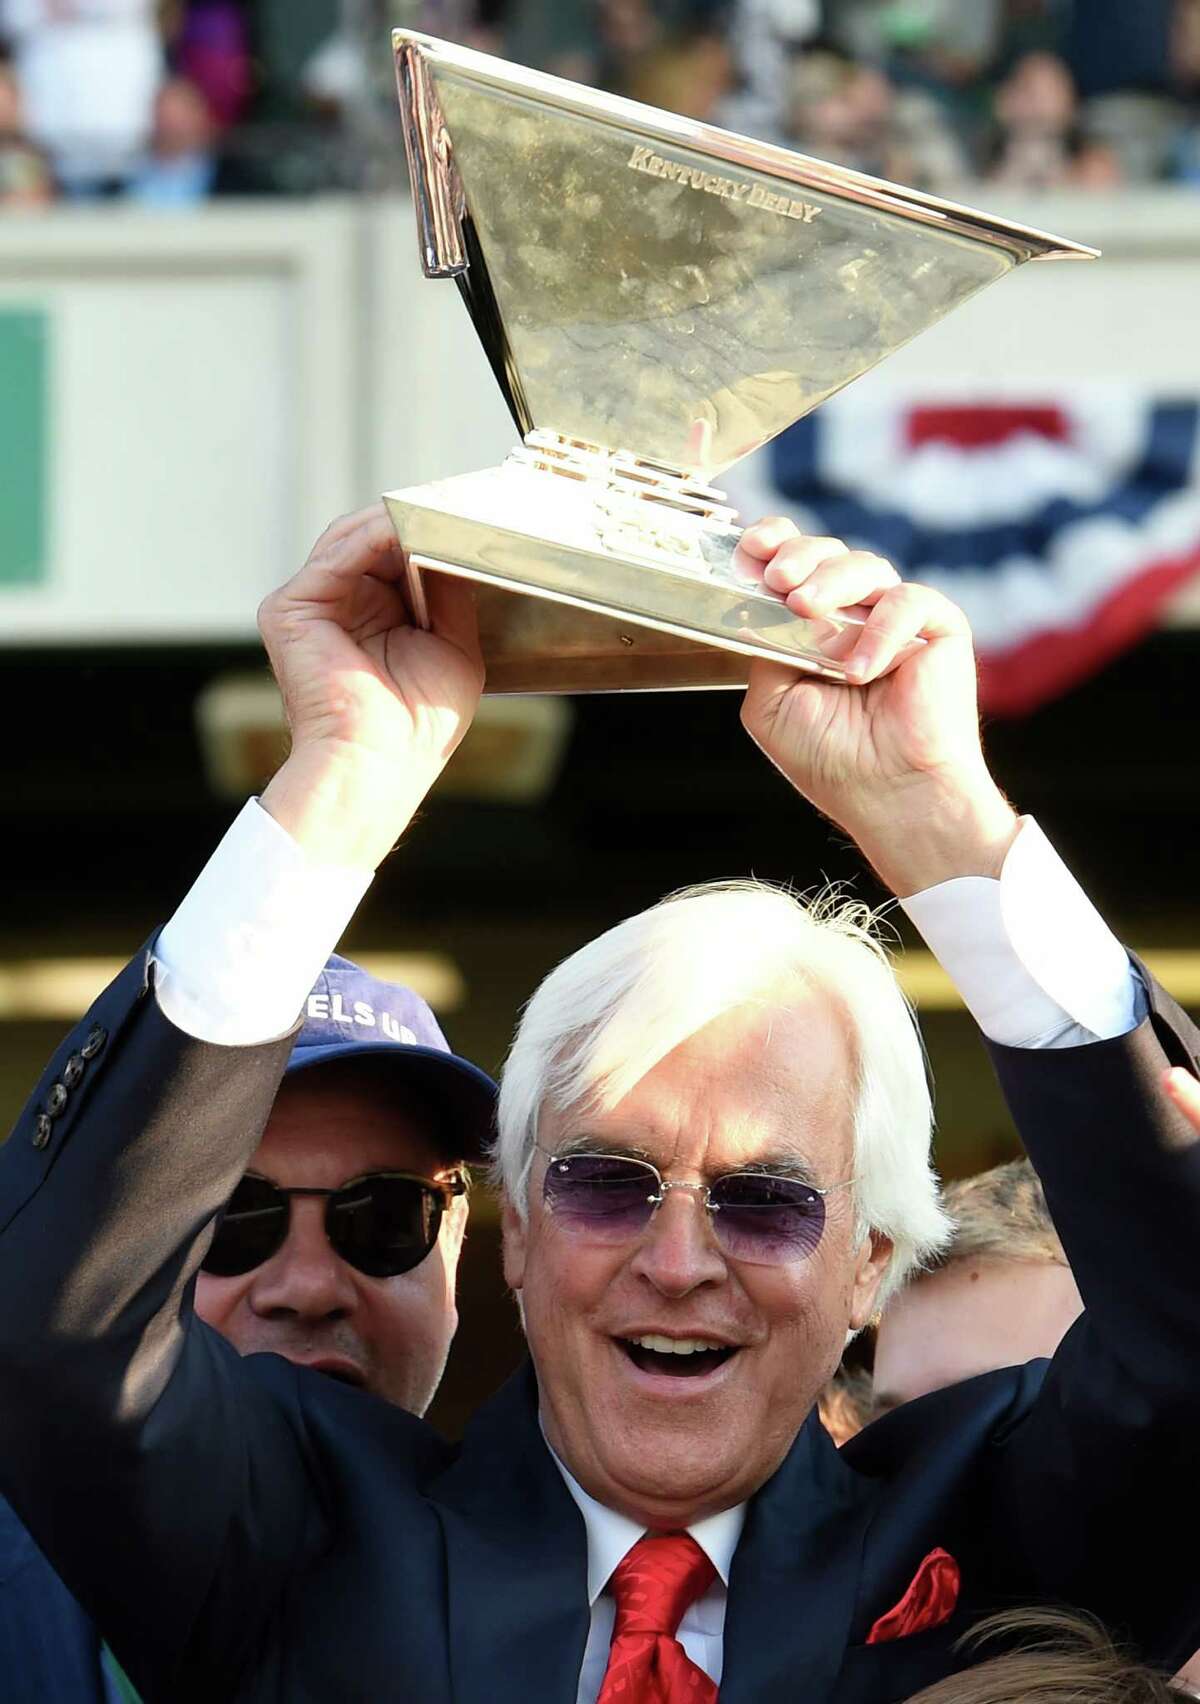 American Pharoah's trainer holds the Triple Crown trophy aloft after his trainee made his way to the record books by winning the 147th running of the Belmont Stakes and thoroughbred racing's Triple Crown June 6, 2015 at Belmont Park in Elmont, N.Y. (Skip Dickstein/Times Union)